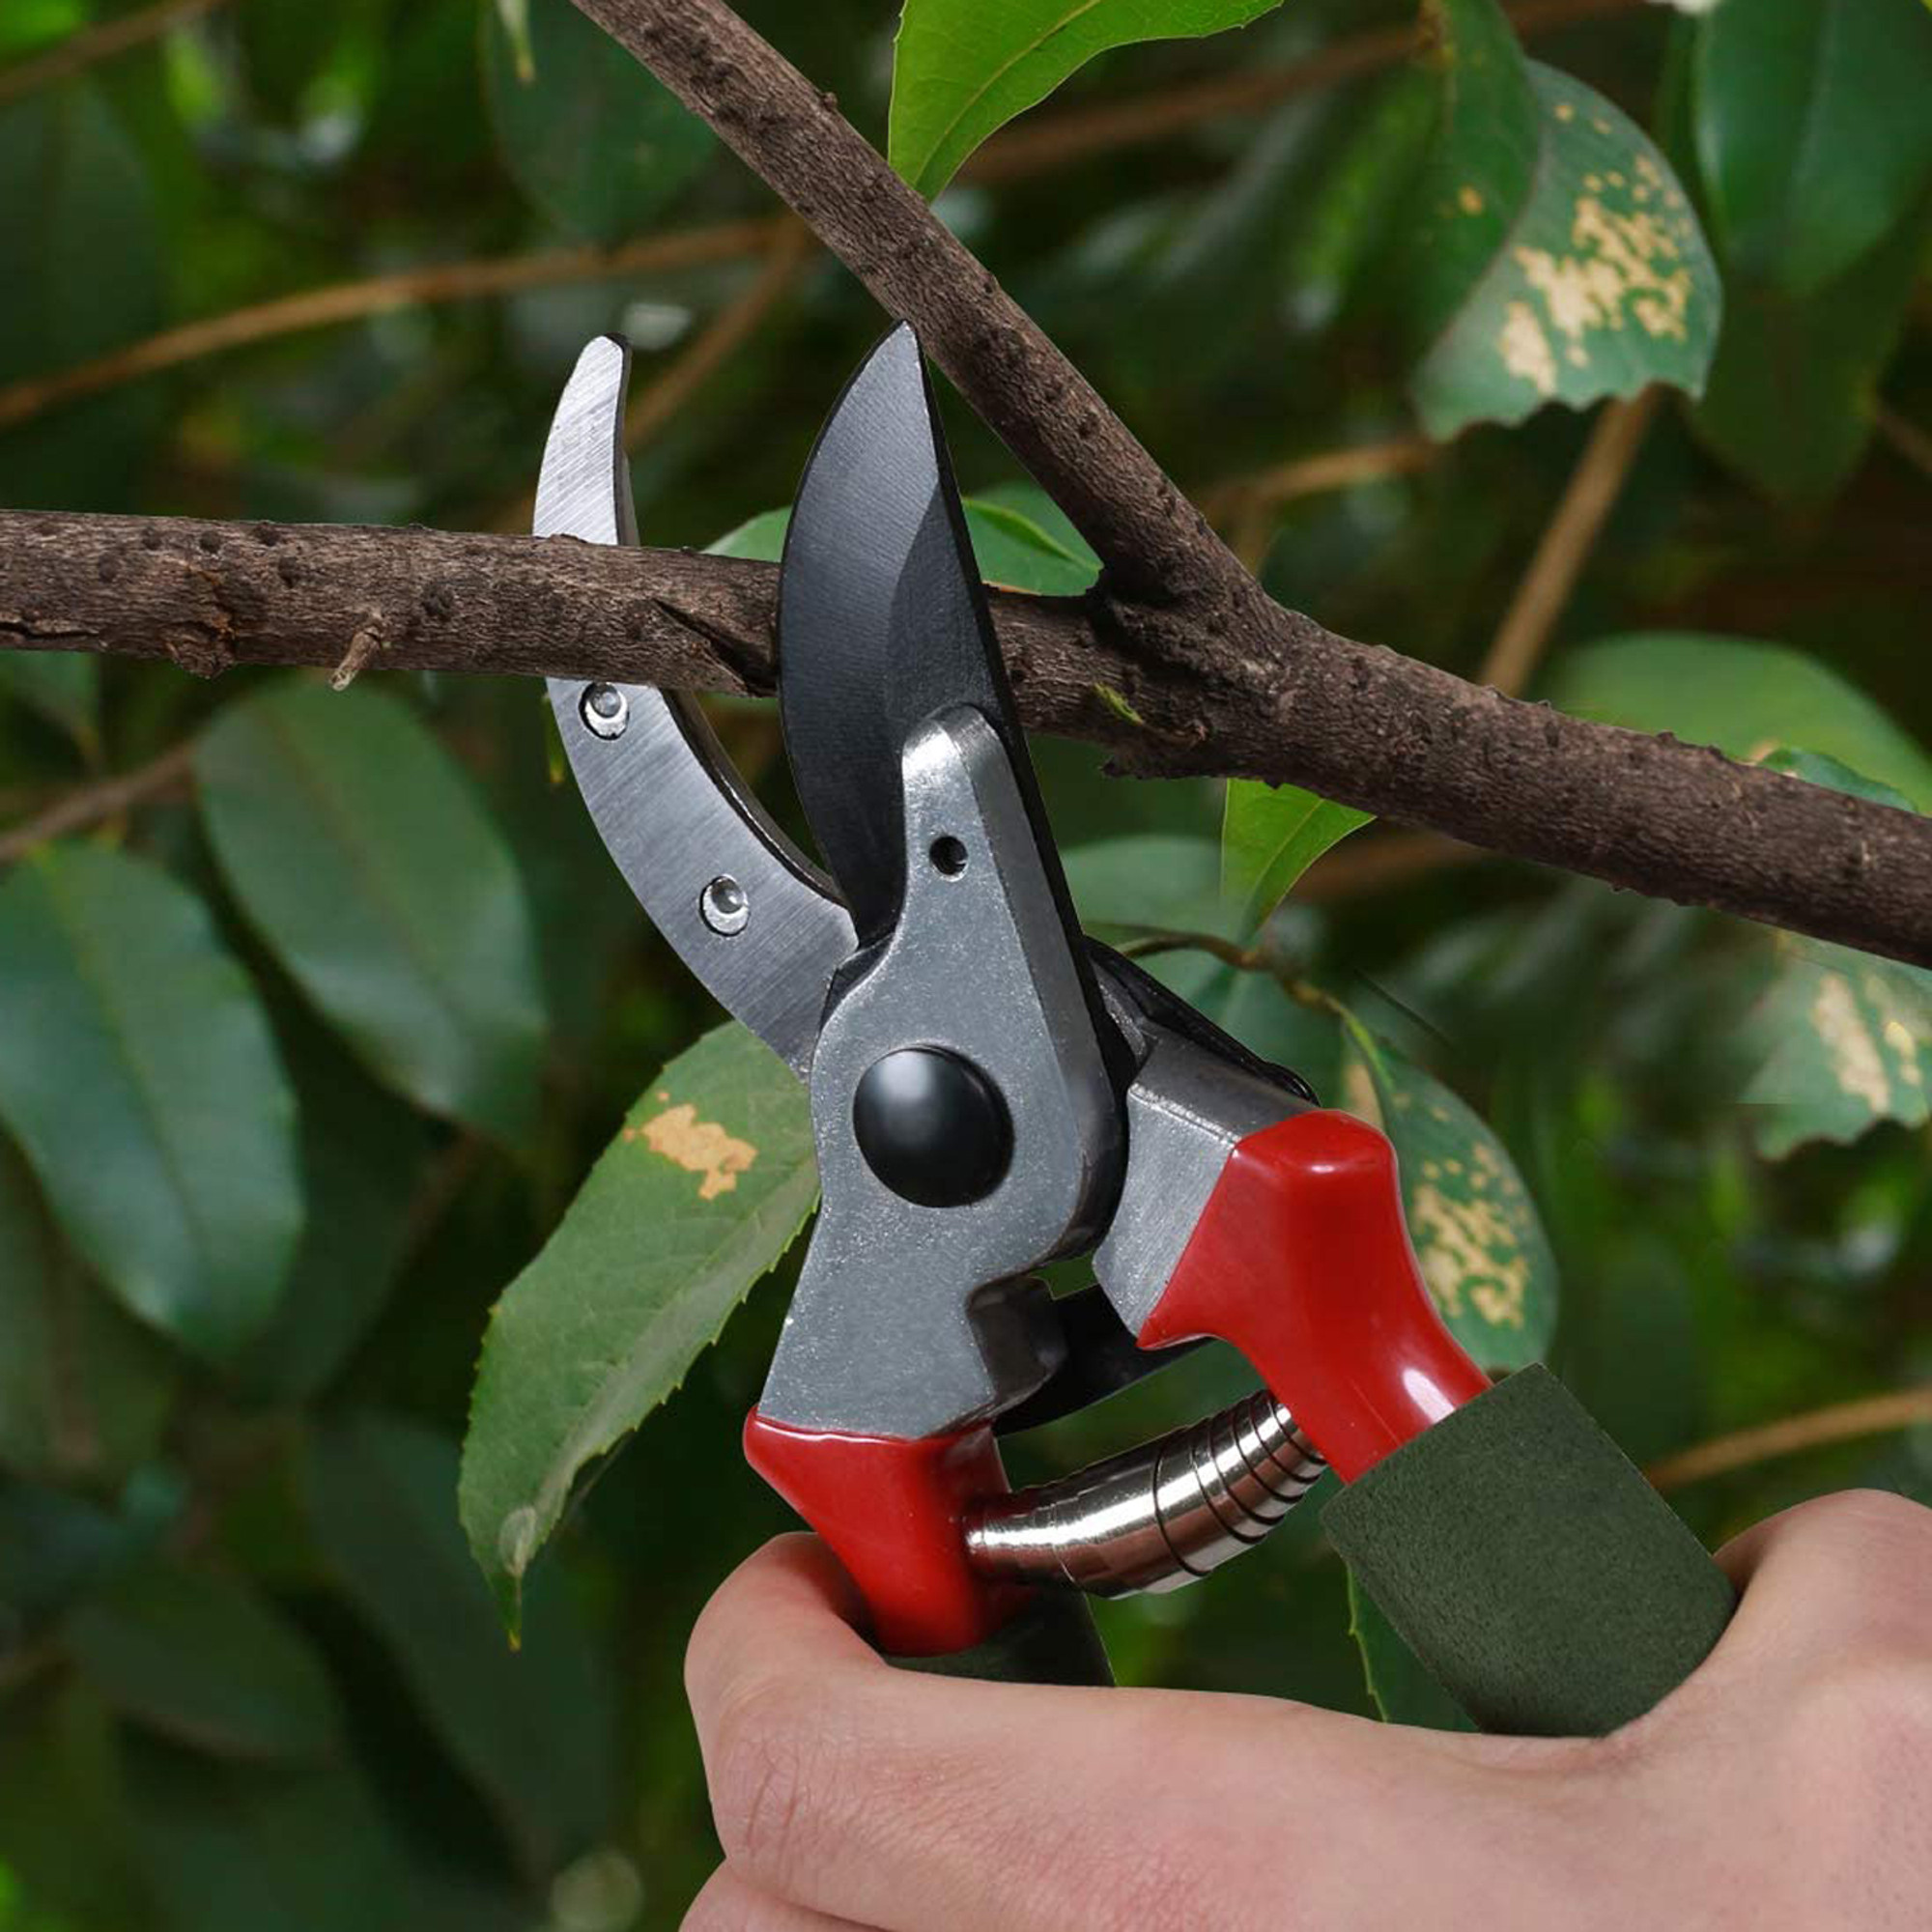 SK5 High Carbon Blades Ergonomic Handle Jucoci Pruning Shears Garden Shears Clippers Garden Tool Scissors 3-Step Ratchet Mechanism Hand Pruner for Gardening Pruning and Trimming. 